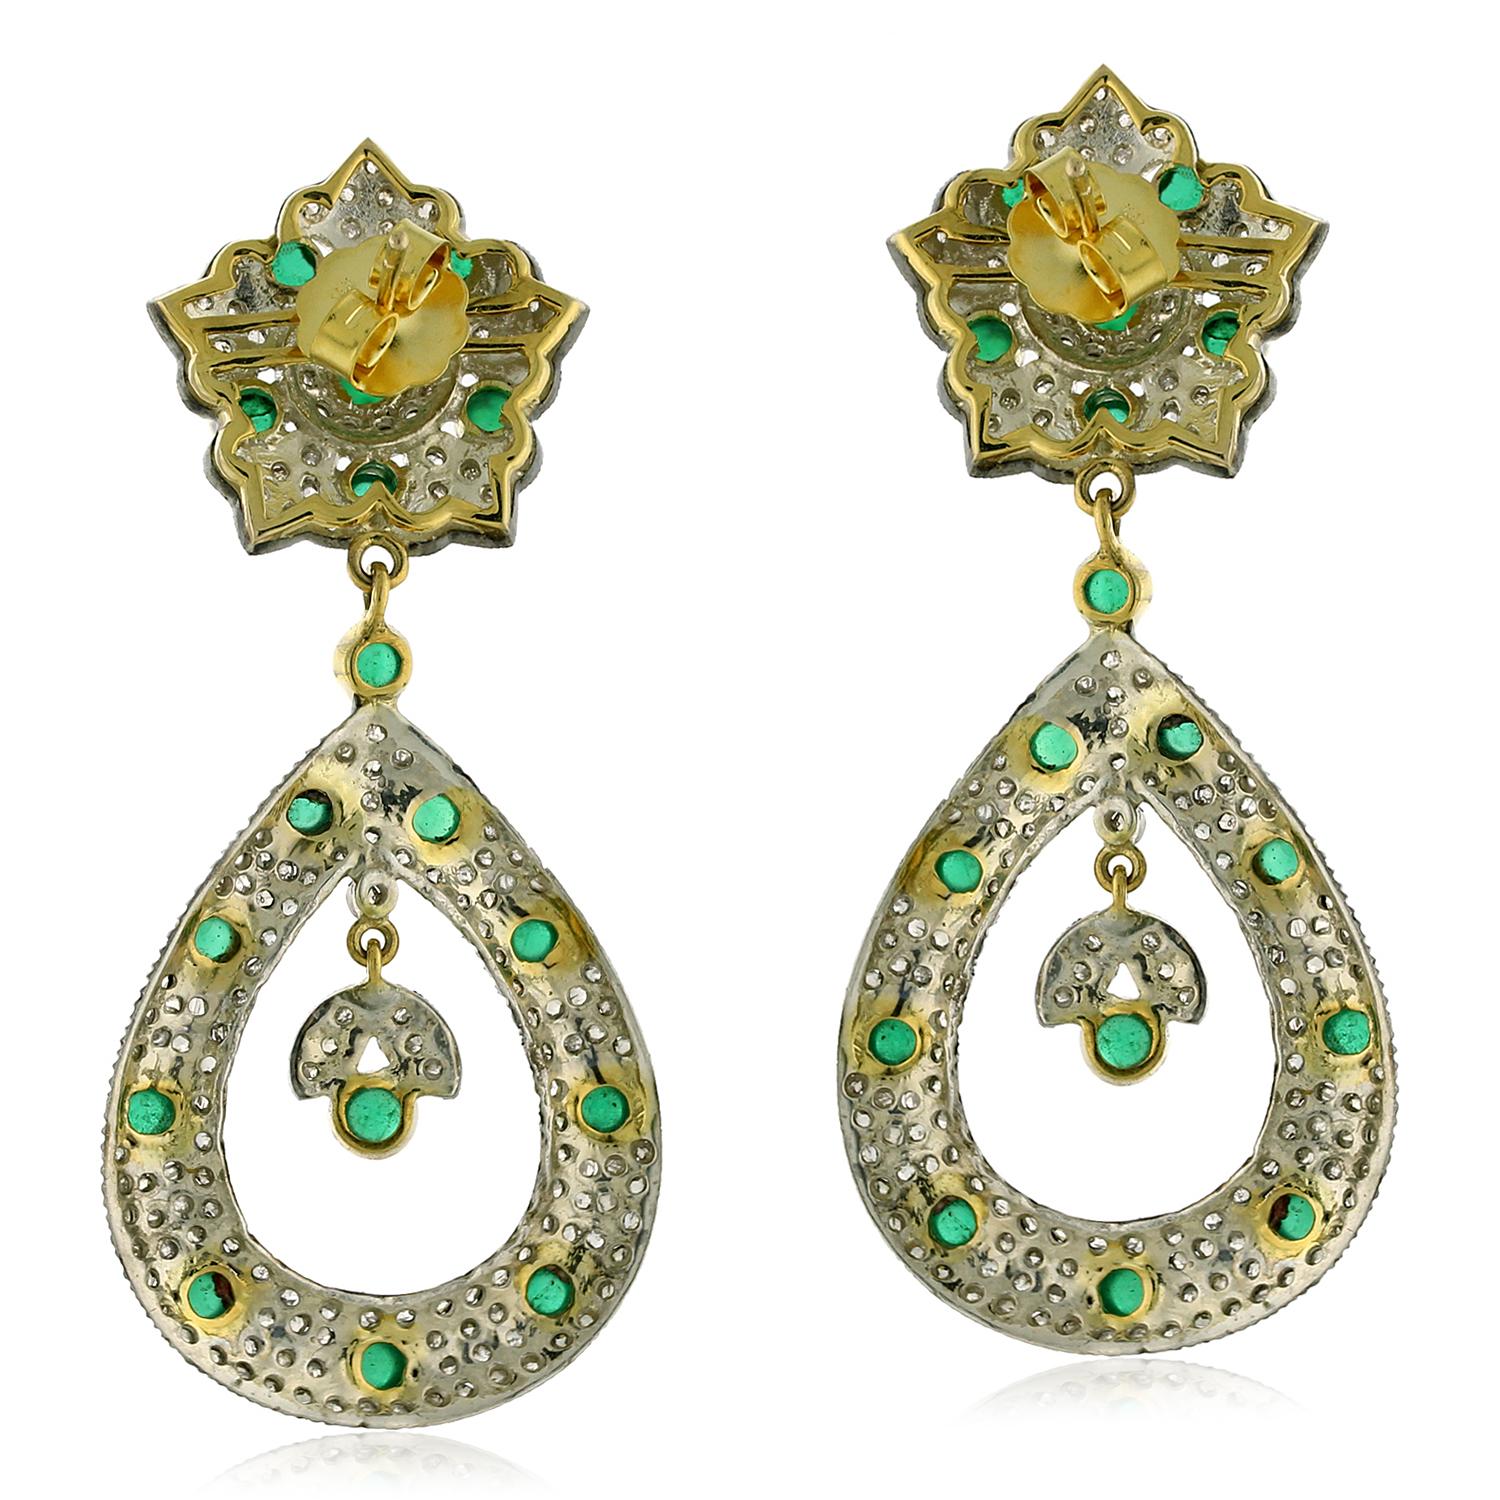 This charming Floral Designer Emerald And Diamond Dangle Earring in Gold and Silver super pretty.

14kt gold: 11.87gms
Diamond: 3.55cts
Silver: 10.54gms
Emerald: 5.21cts
